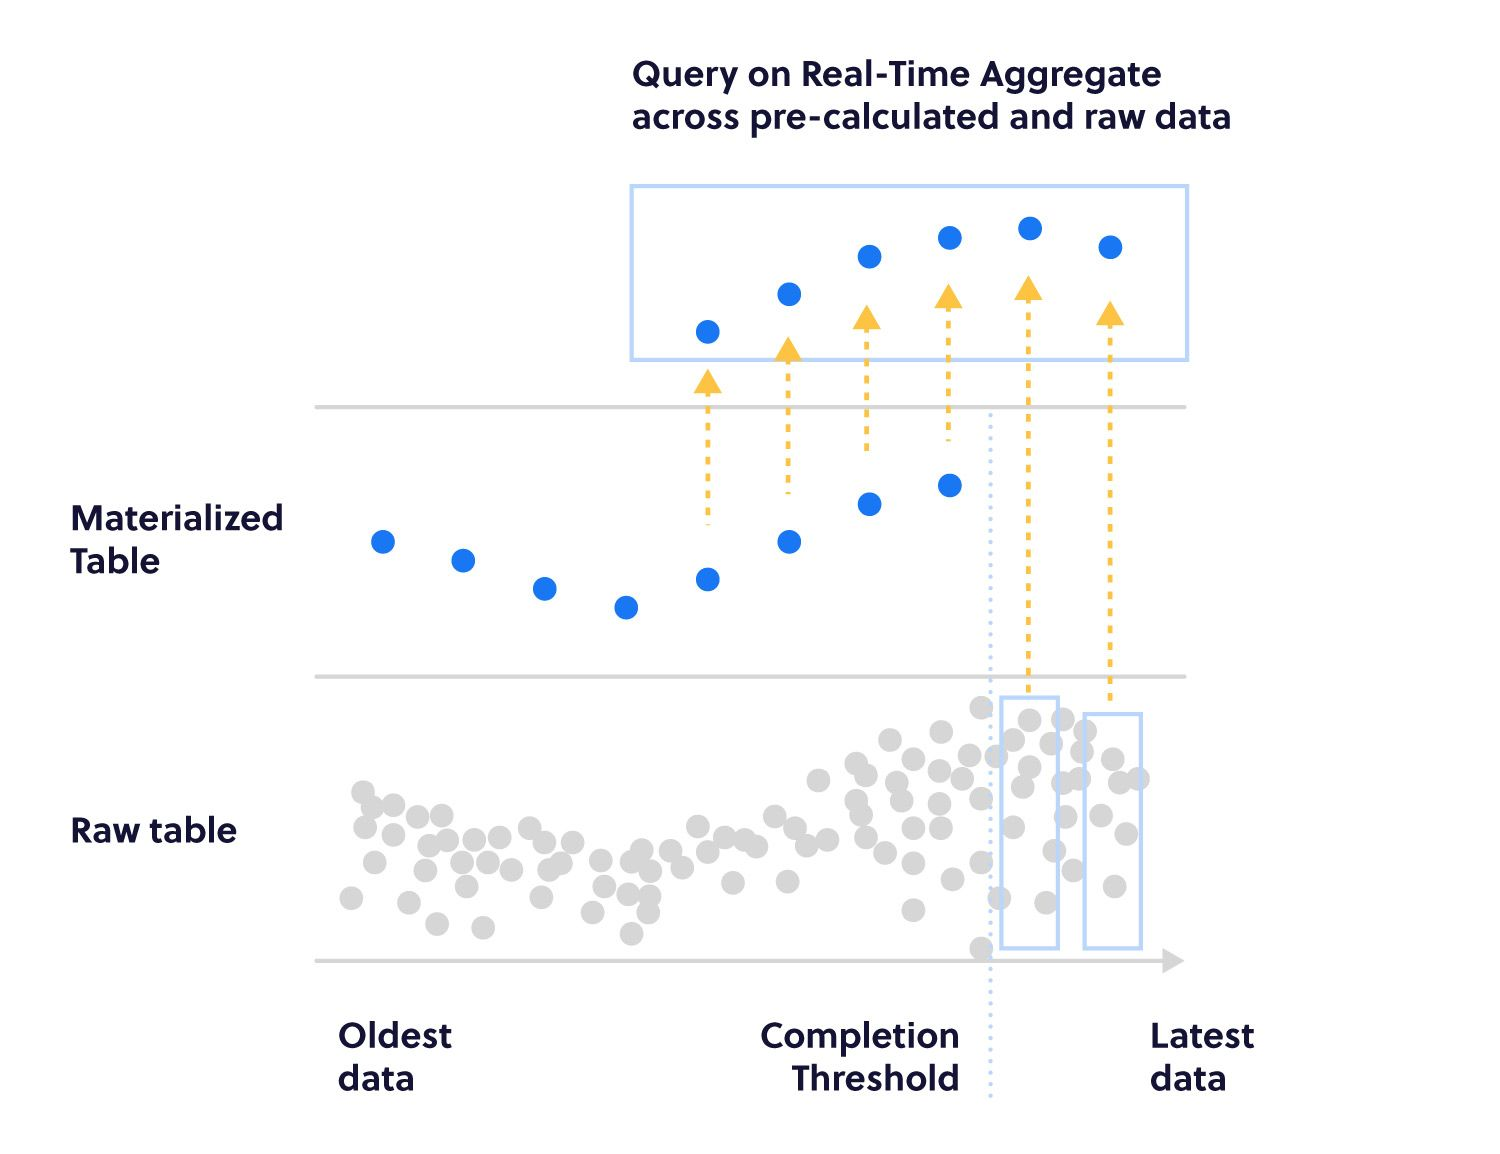 Diagram showing how data moves to a materialized table as it ages and continuous aggregate queries execute, and how real-time aggregates combine this data with newer, not yet materialized data